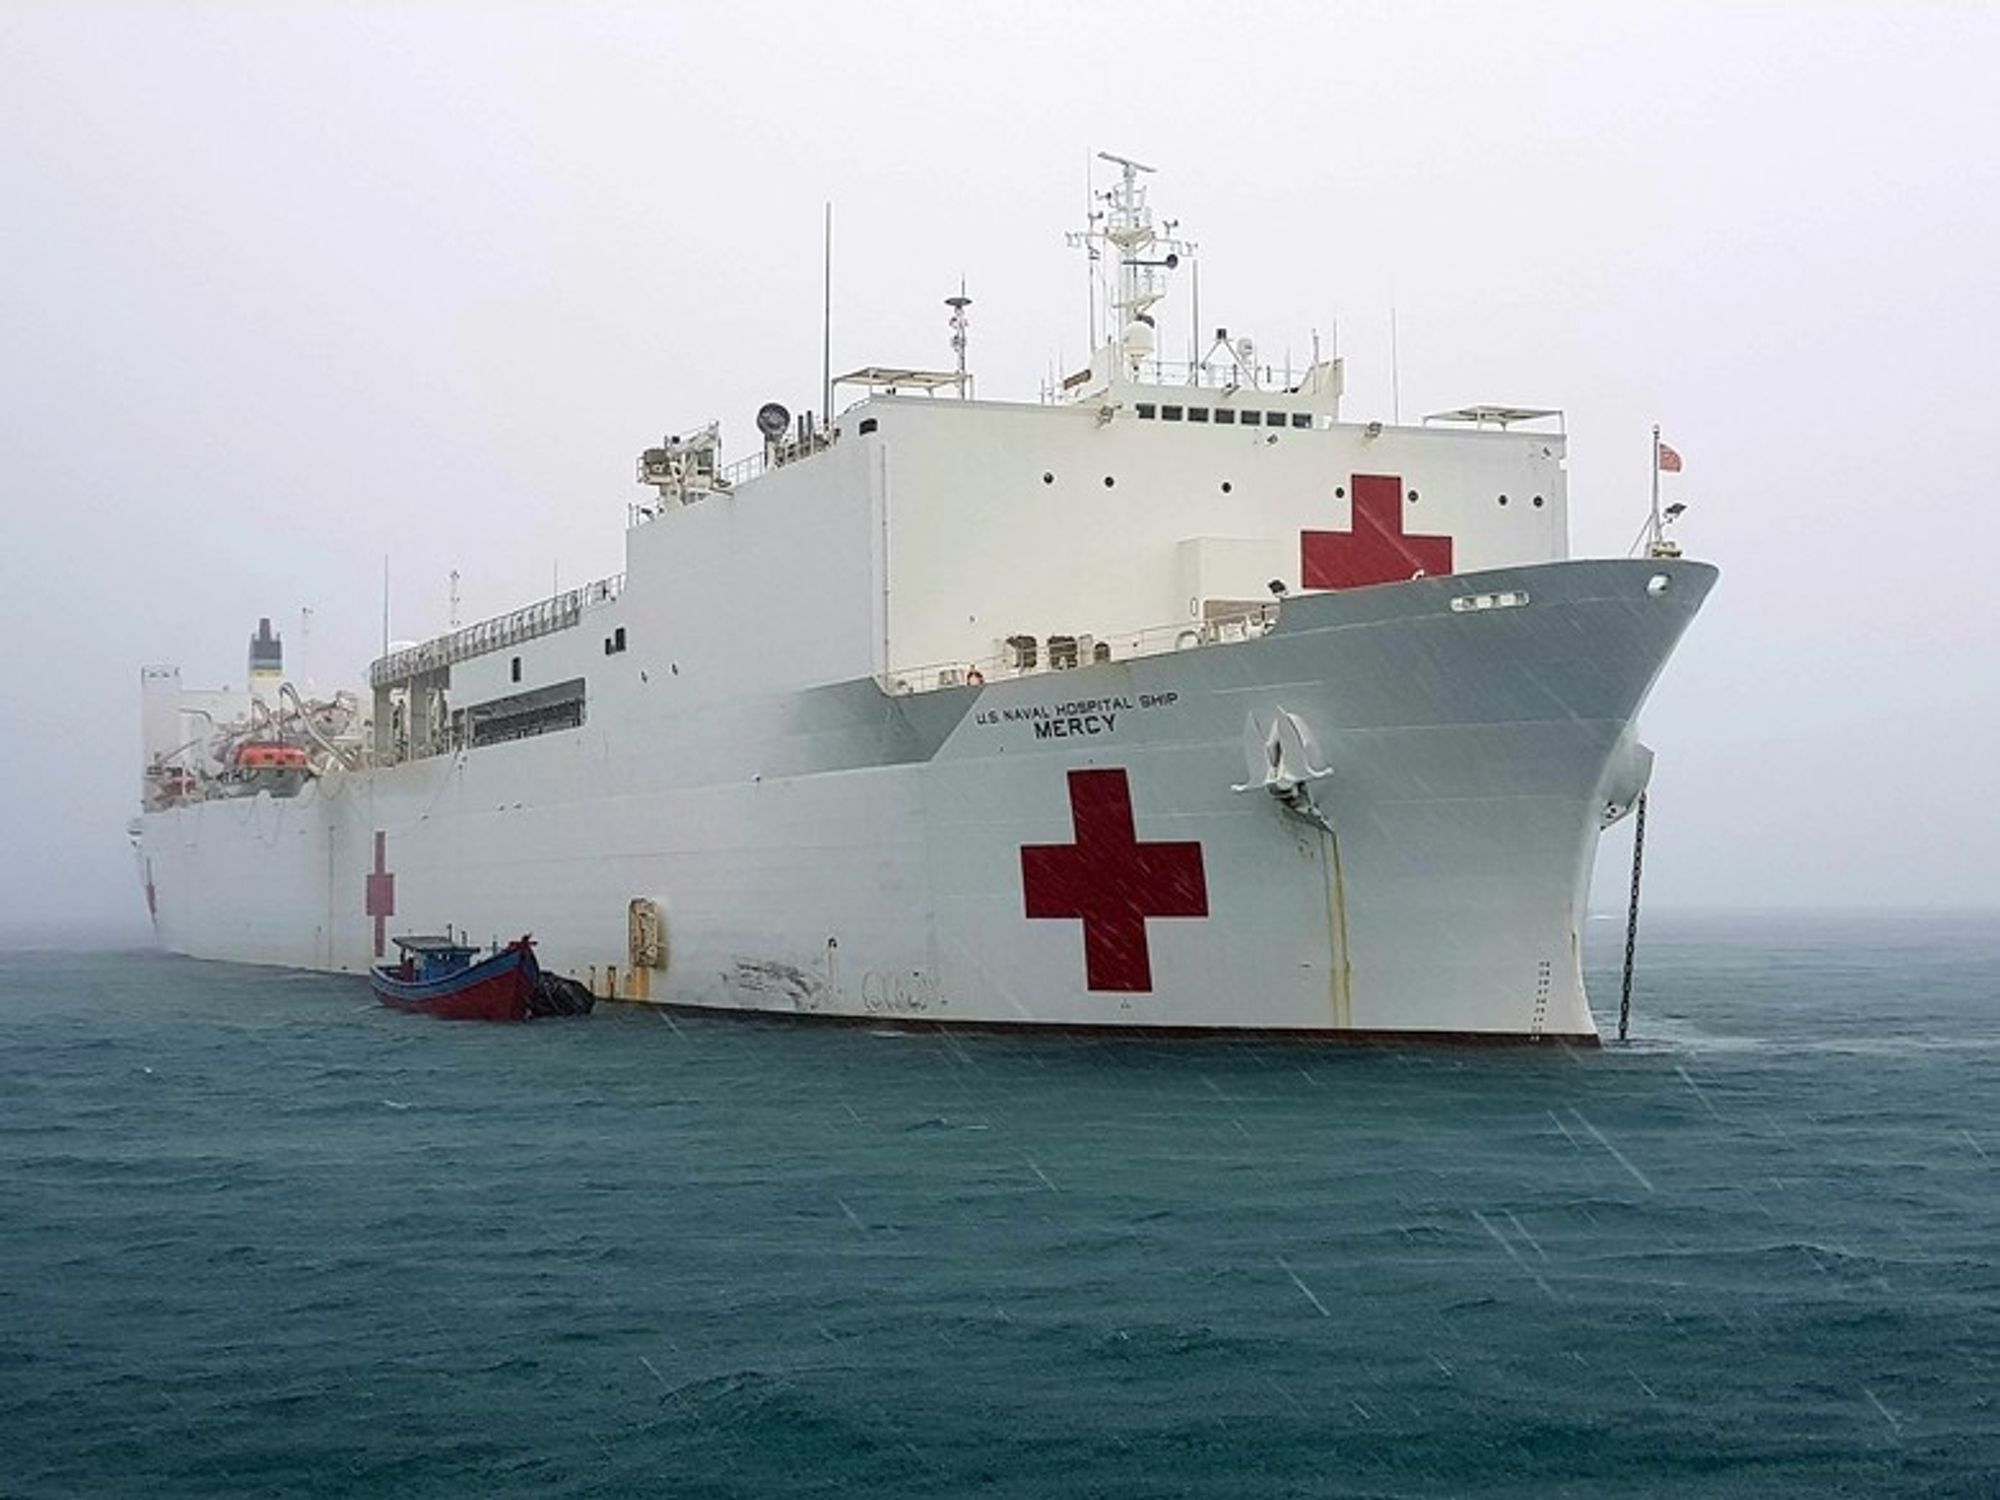 Coronavirus Updates: Mercy Hospital Ship Arrives in L.A., Gates Warns About COVID-19 Fight, SMMUSD Closes Indefinitely